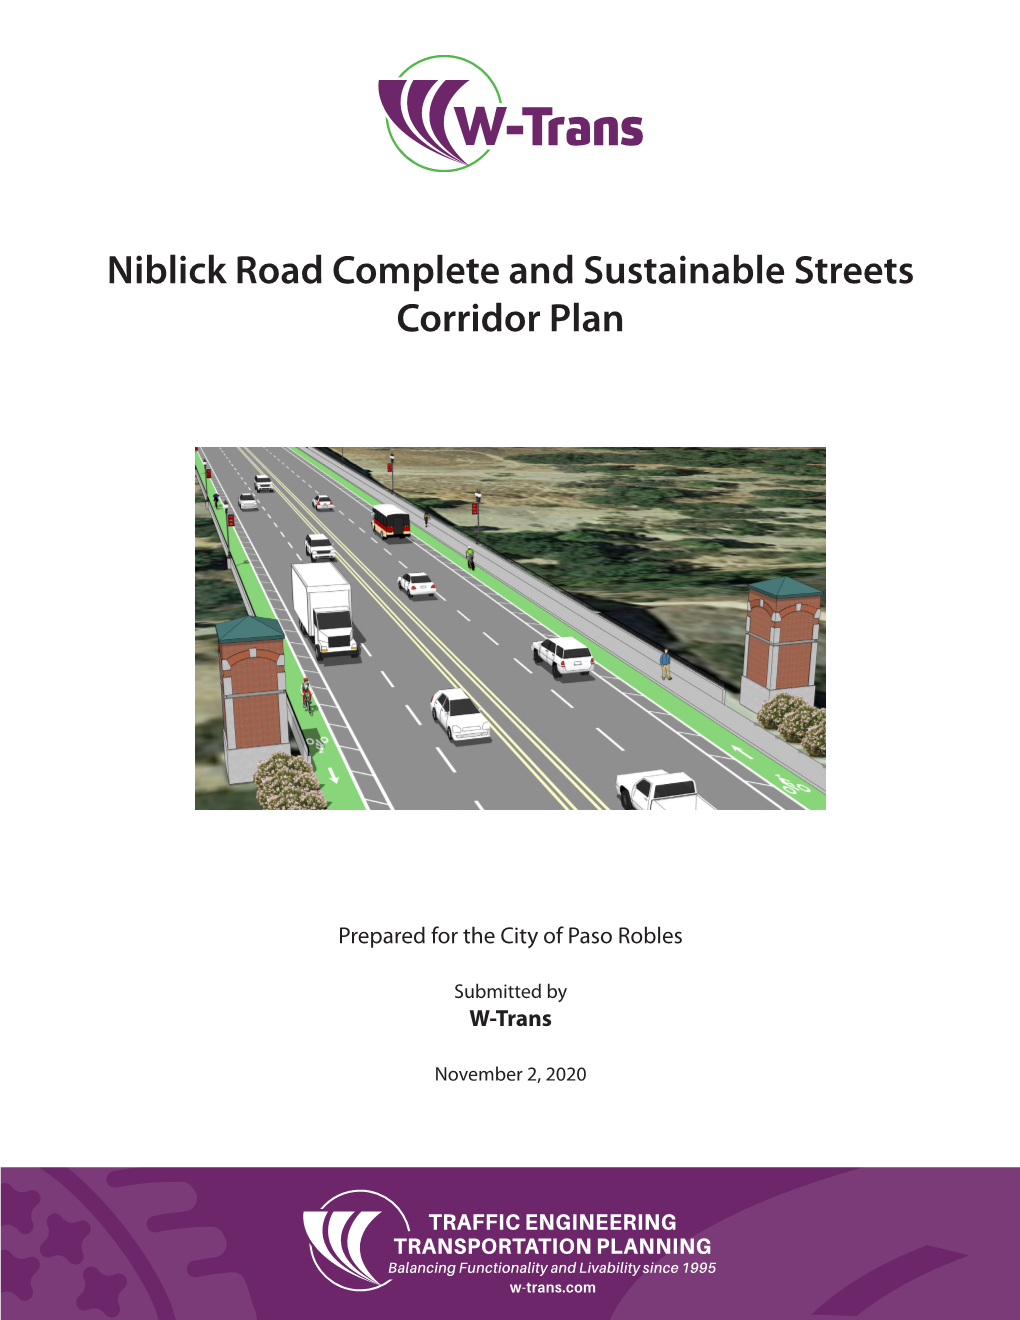 Niblick Road Complete and Sustainable Streets Corridor Plan